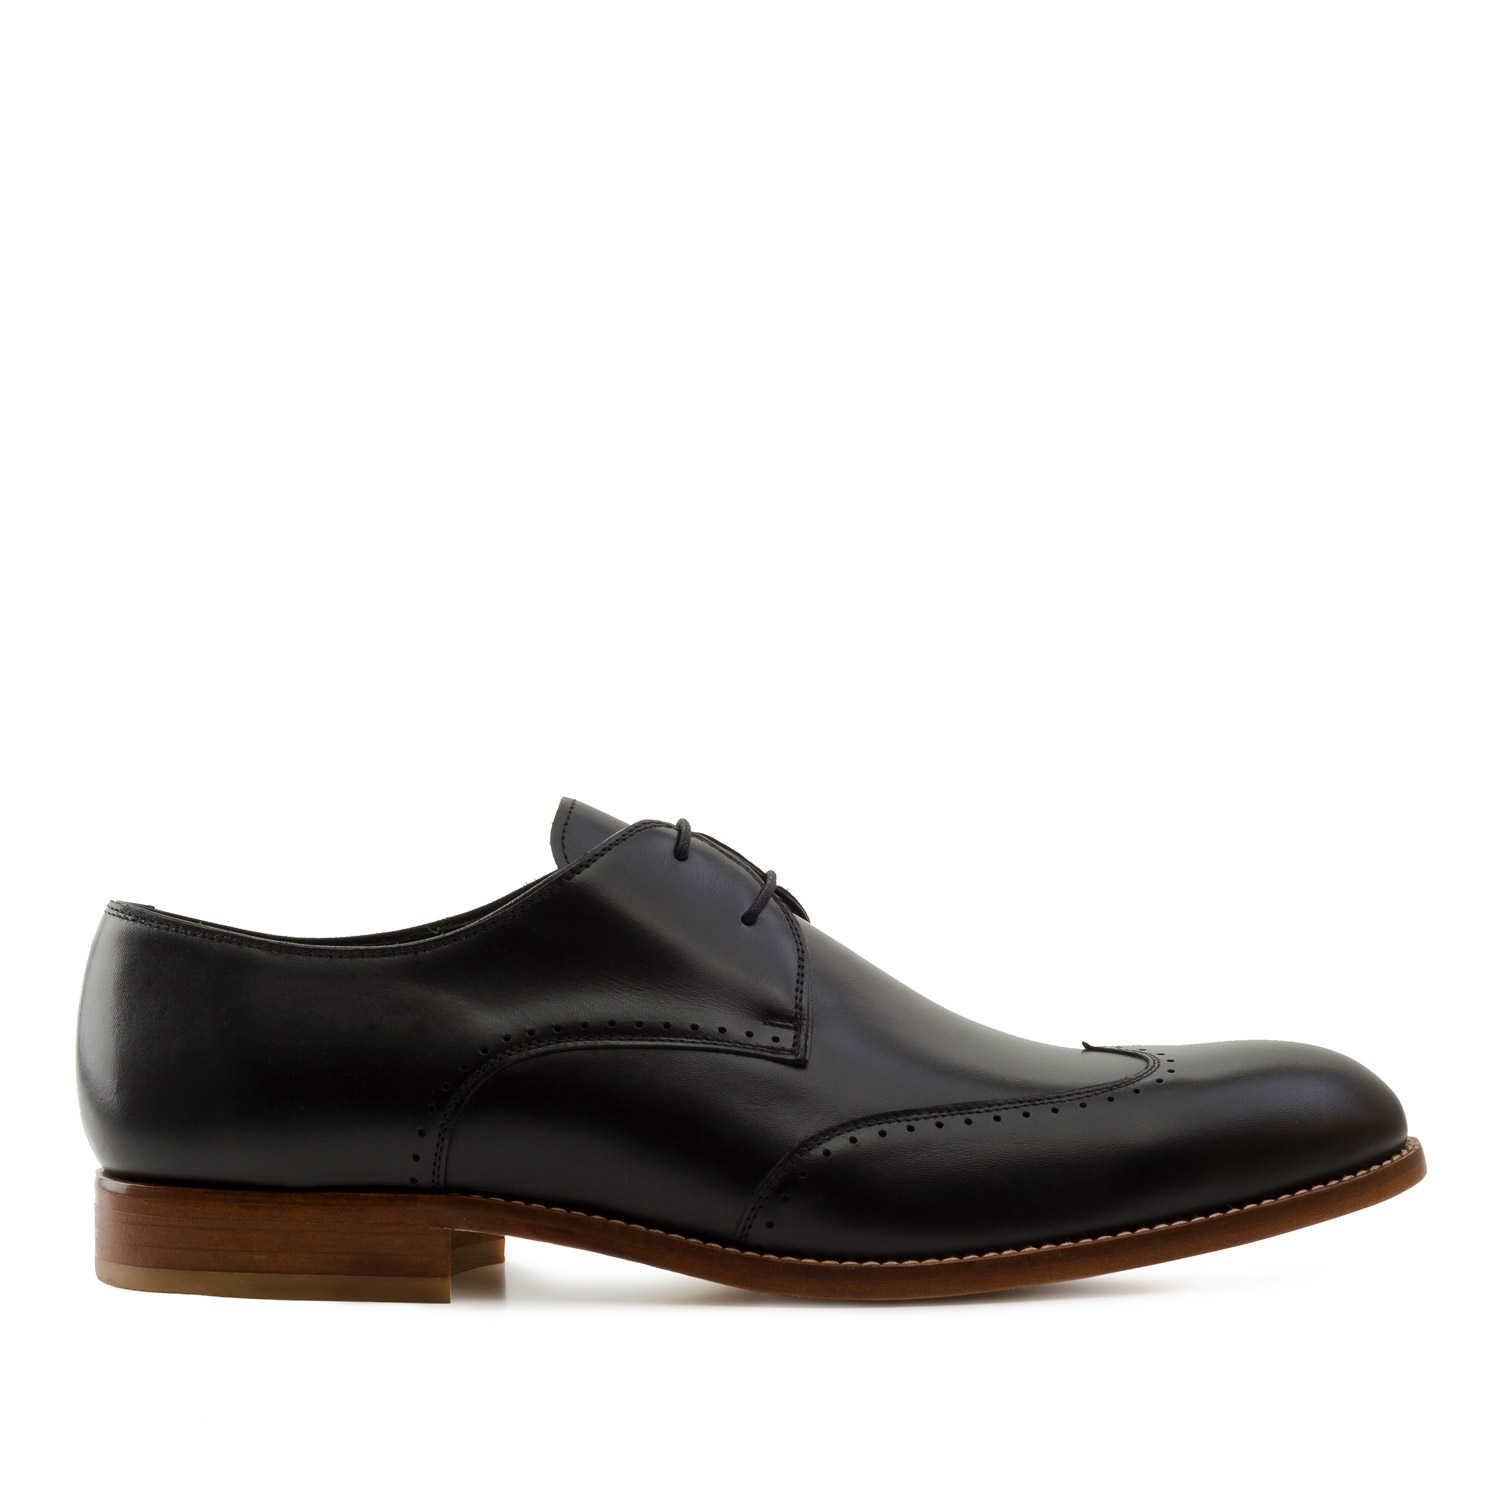 Men's Oxford Shoes in Black Leather 